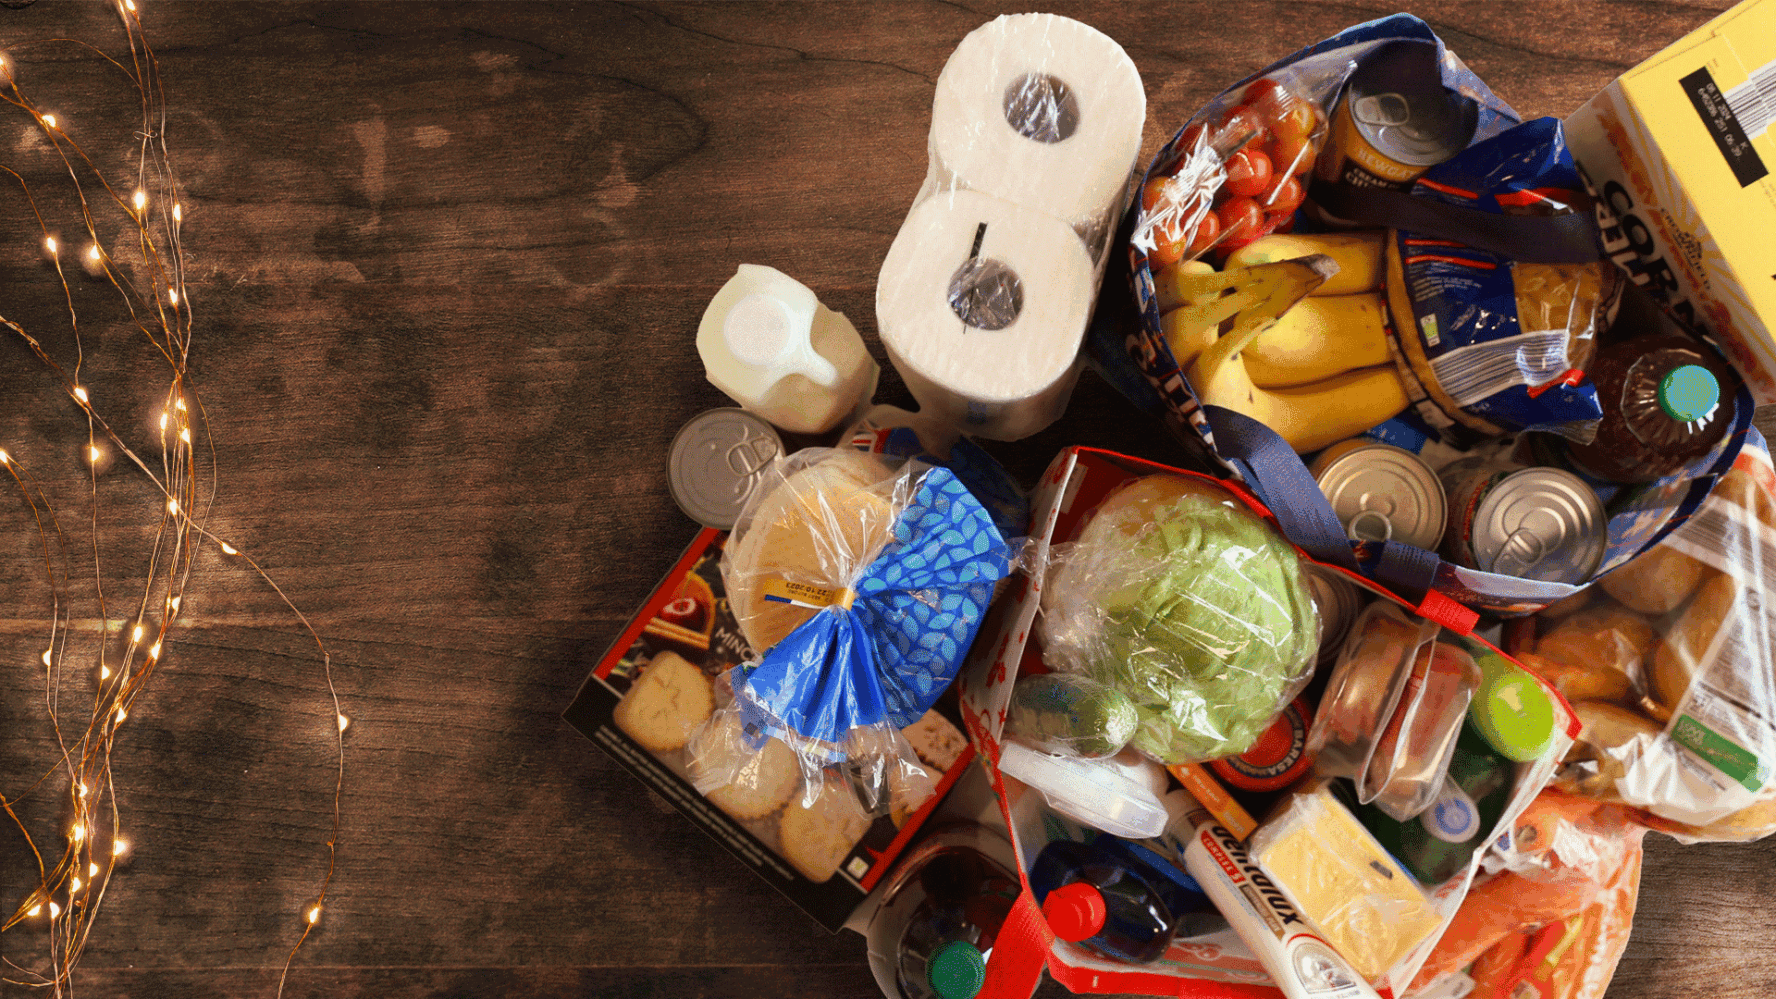 A Christmas hamper shown from above, filled with kitchen roll, bread, biscuits, bananas, cereal, salad, tins and more.